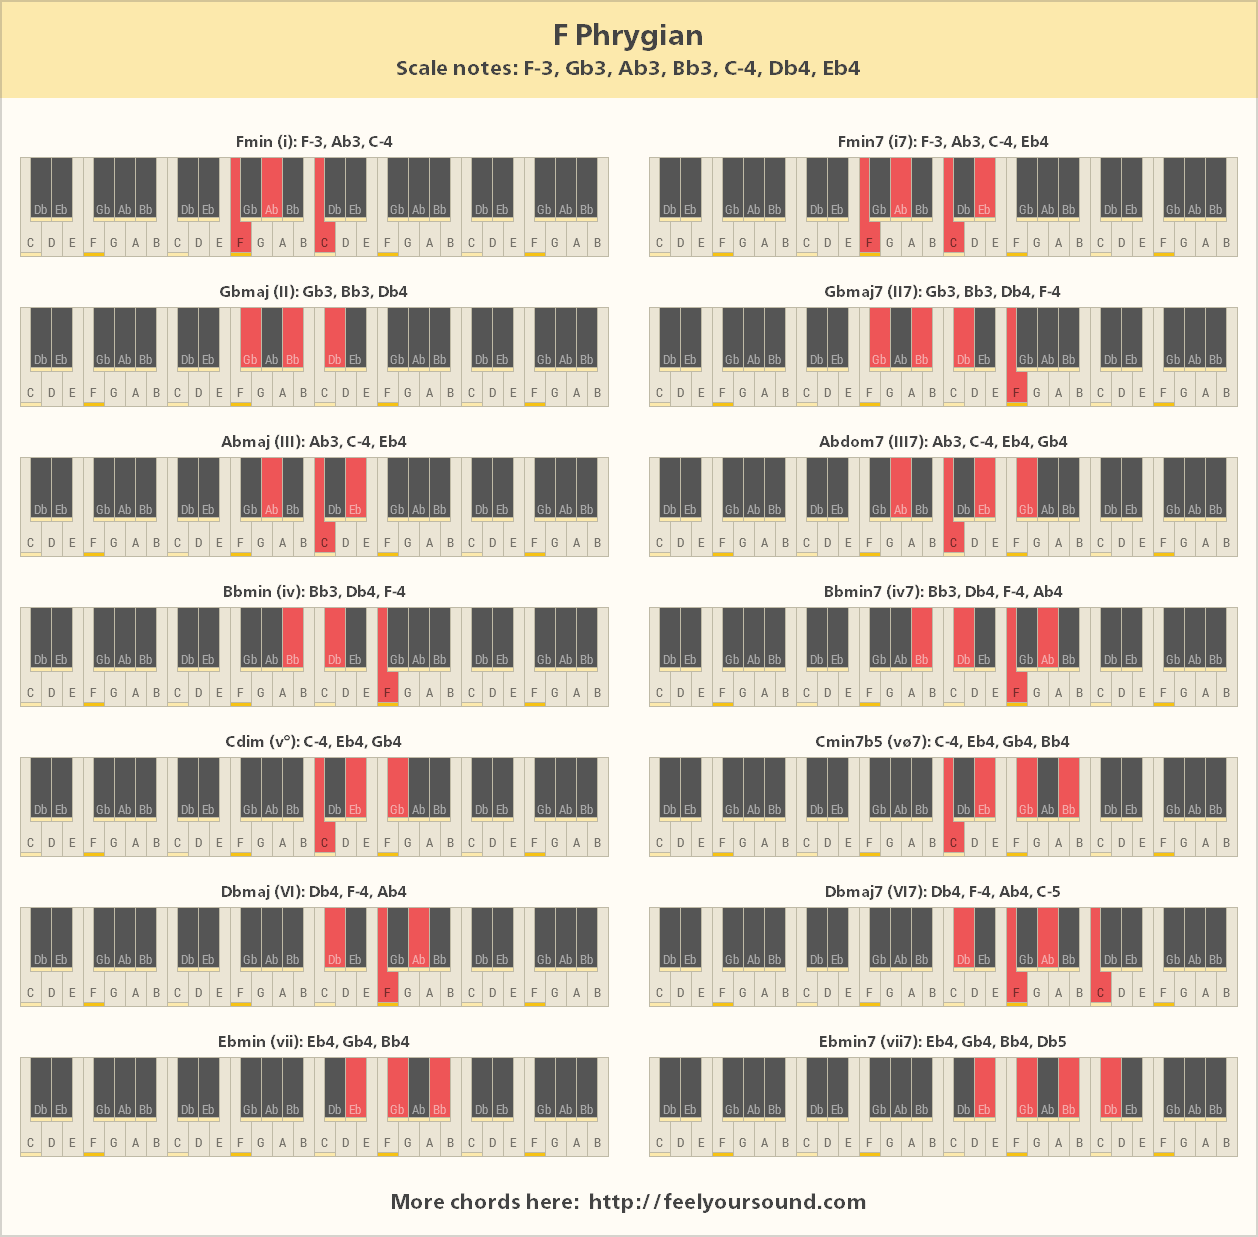 All important chords of F Phrygian